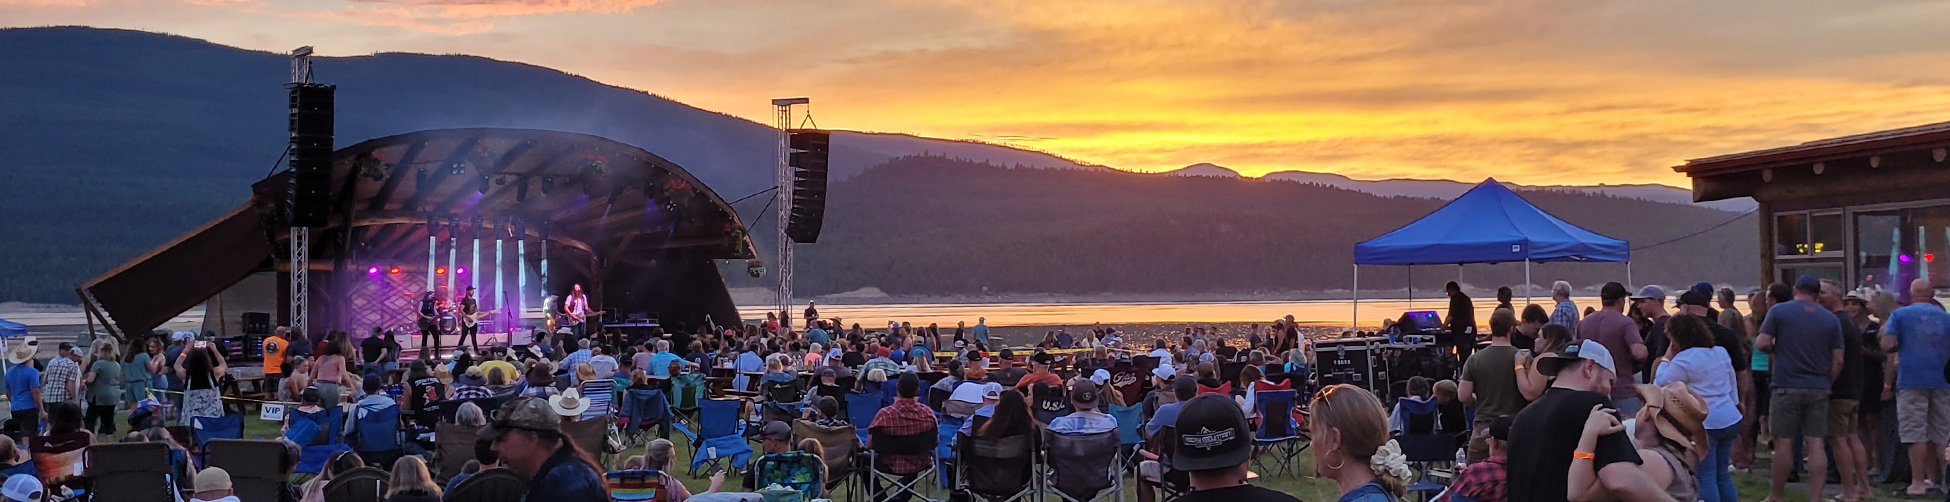 Abayance Bay Marina Music Concerts & Events, Get Tickets Now.